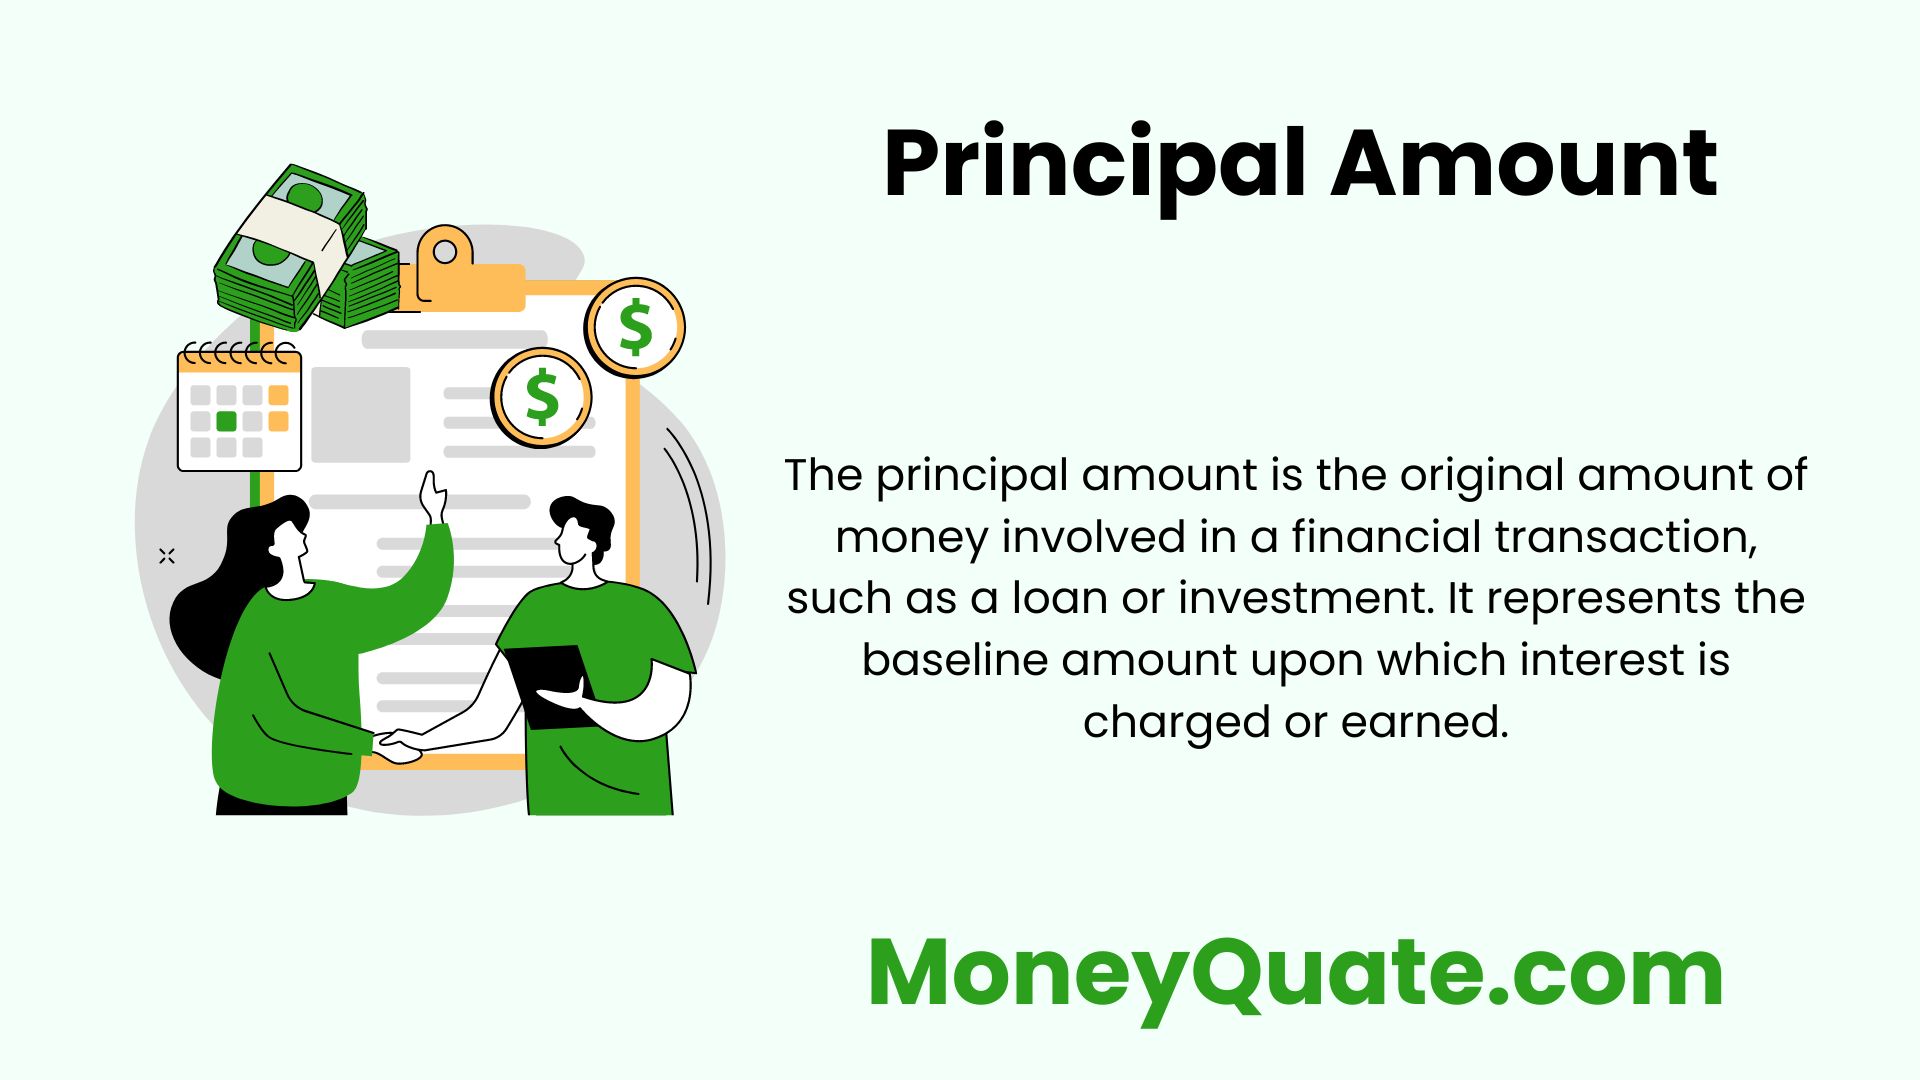 The principal amount, often simply referred to as "principal," is the original sum of money borrowed or invested, upon which interest is calculated.